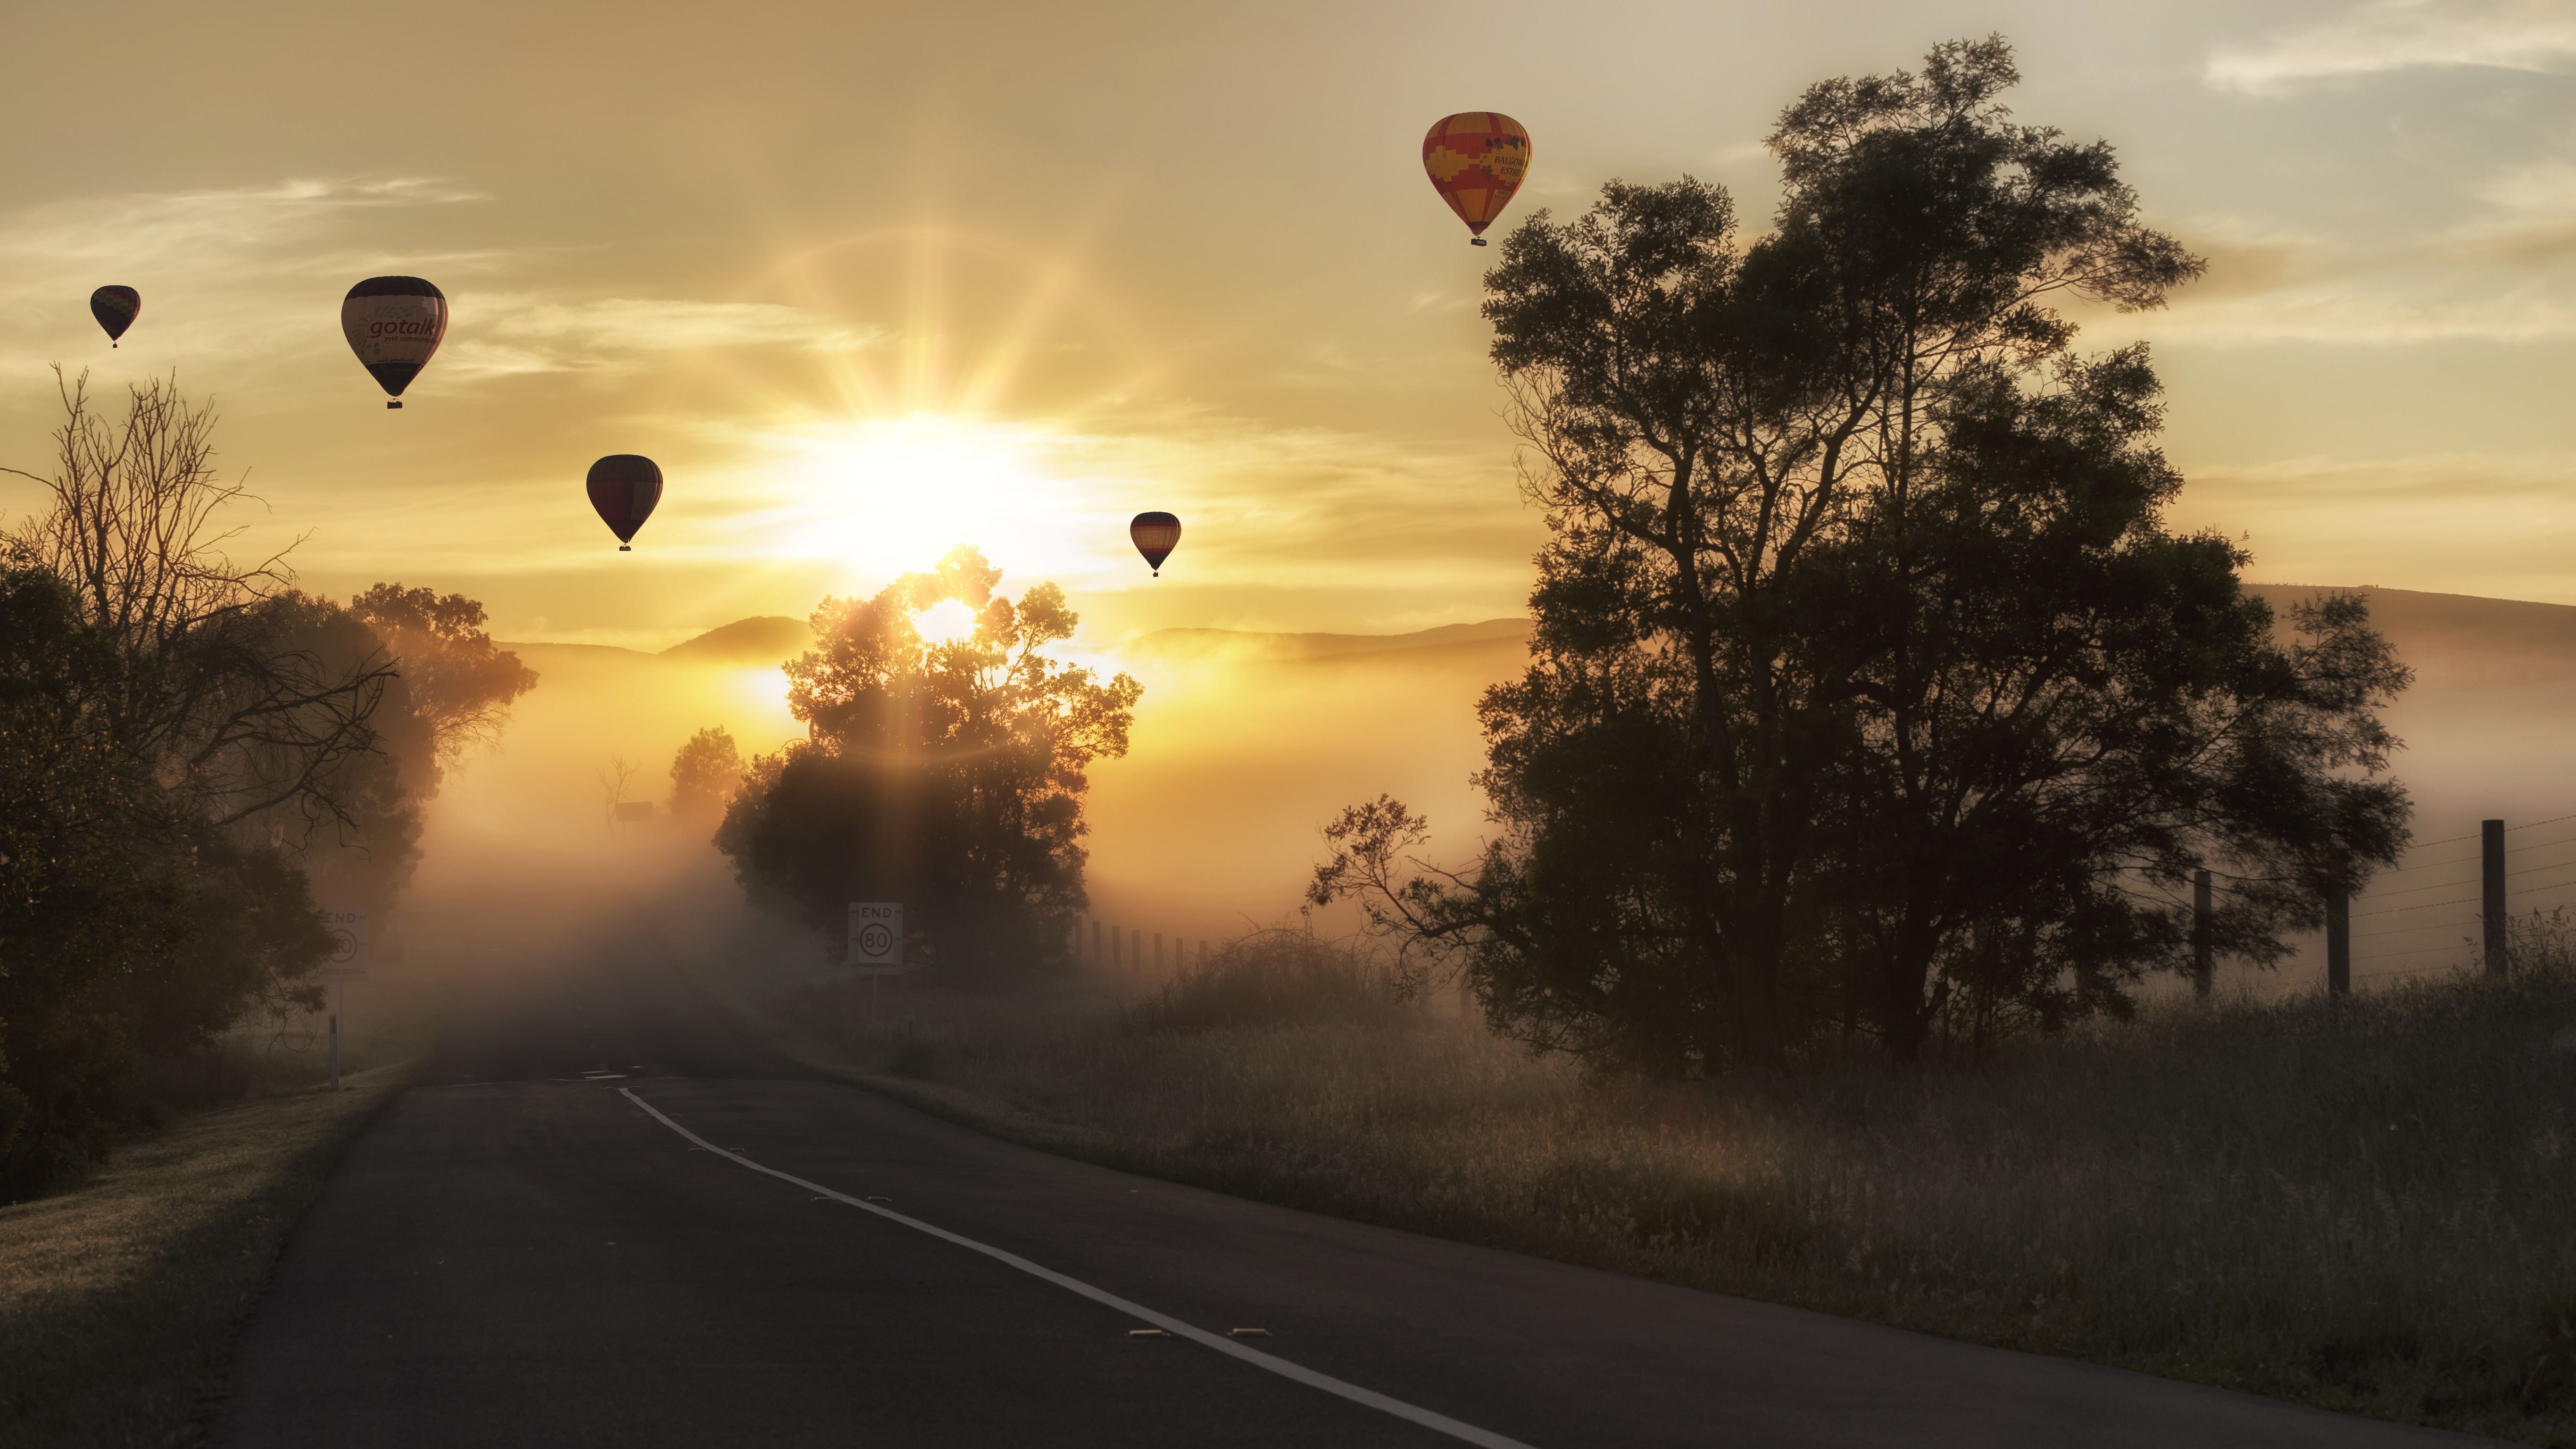 Smartphone Background nature, balloons, road, sunset